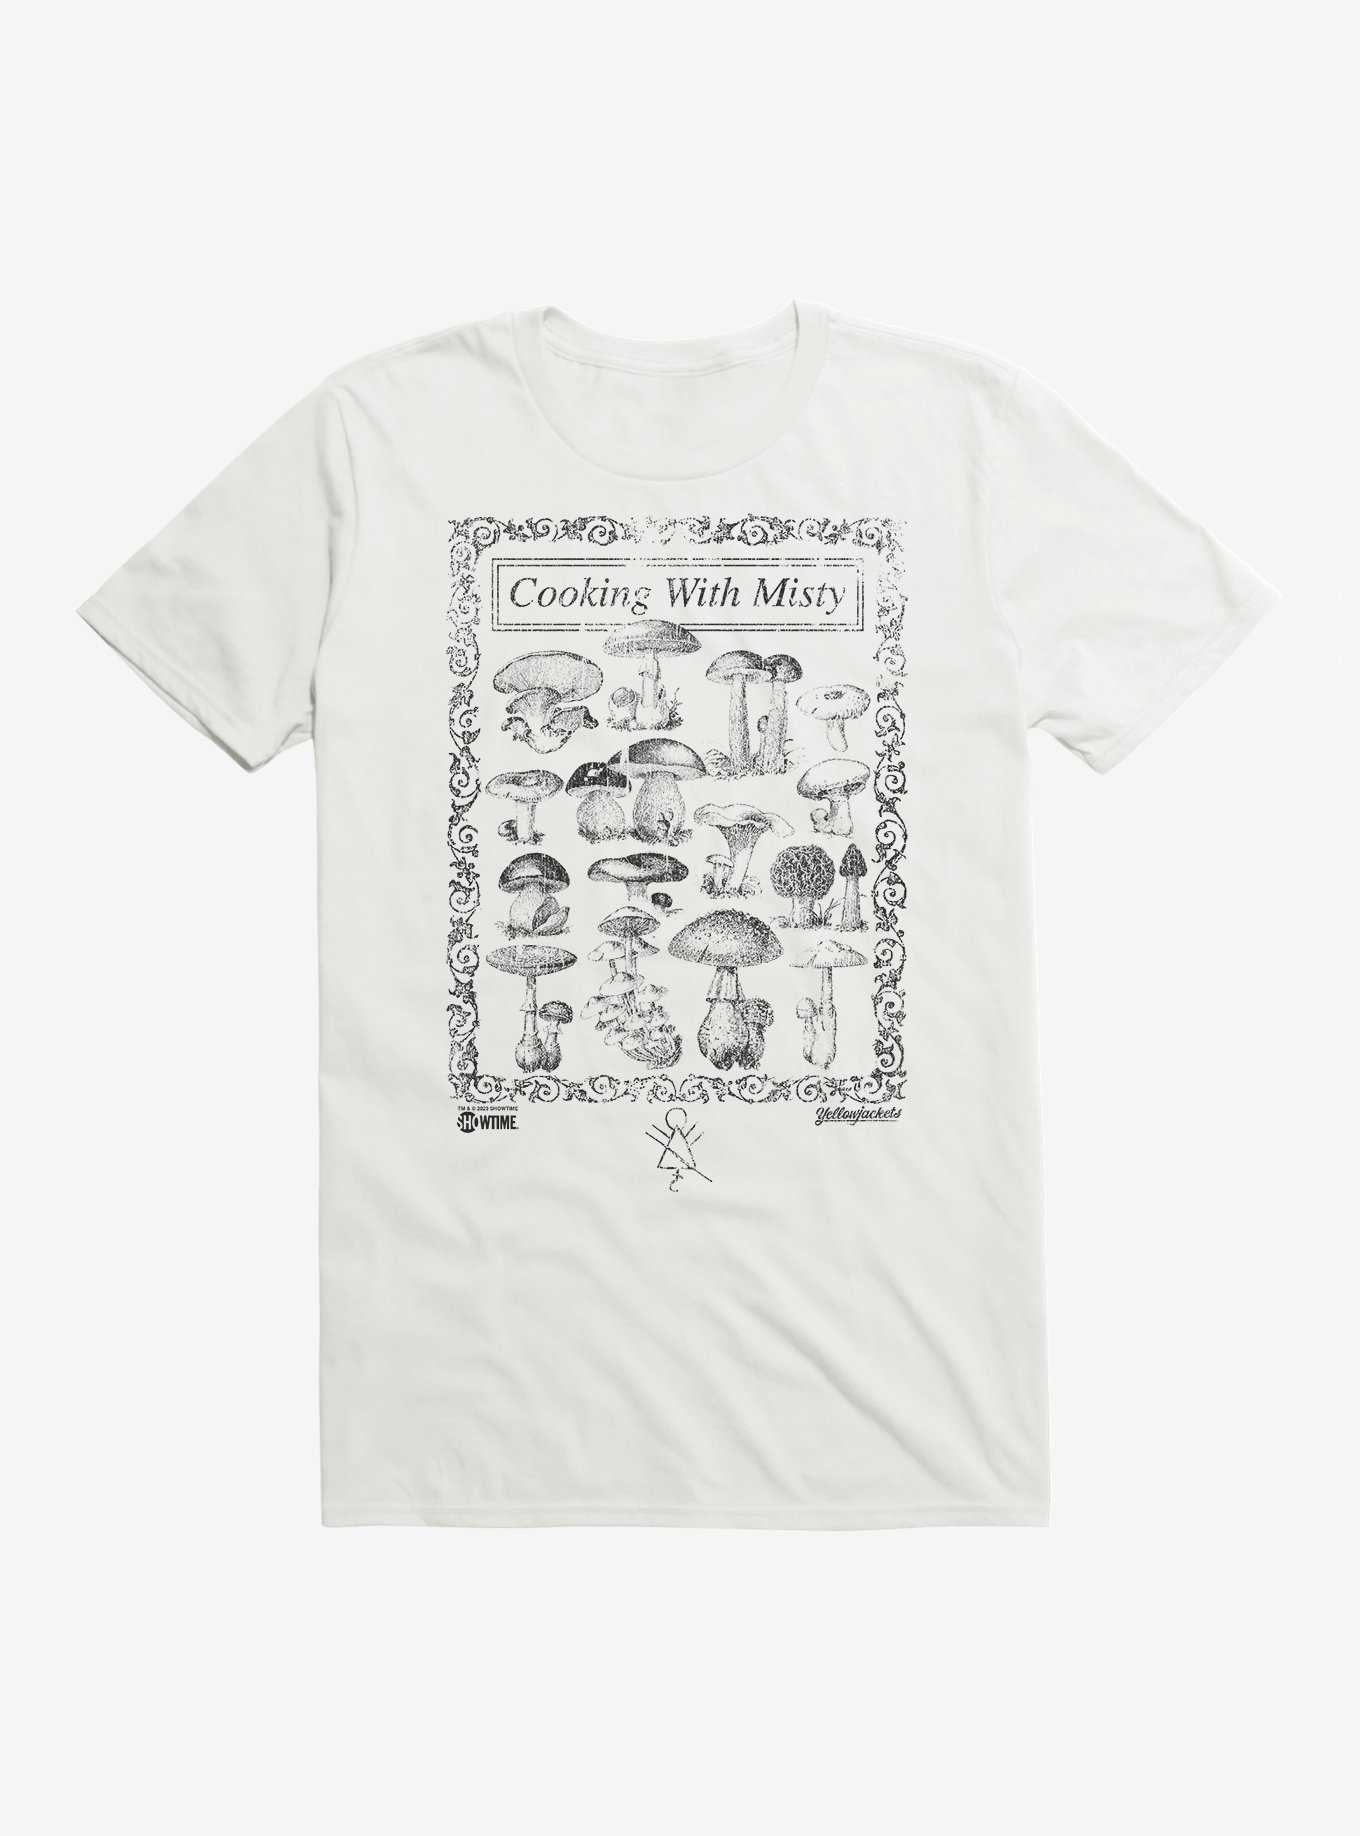 Yellowjackets Cooking With Misty Mushroom T-Shirt, , hi-res